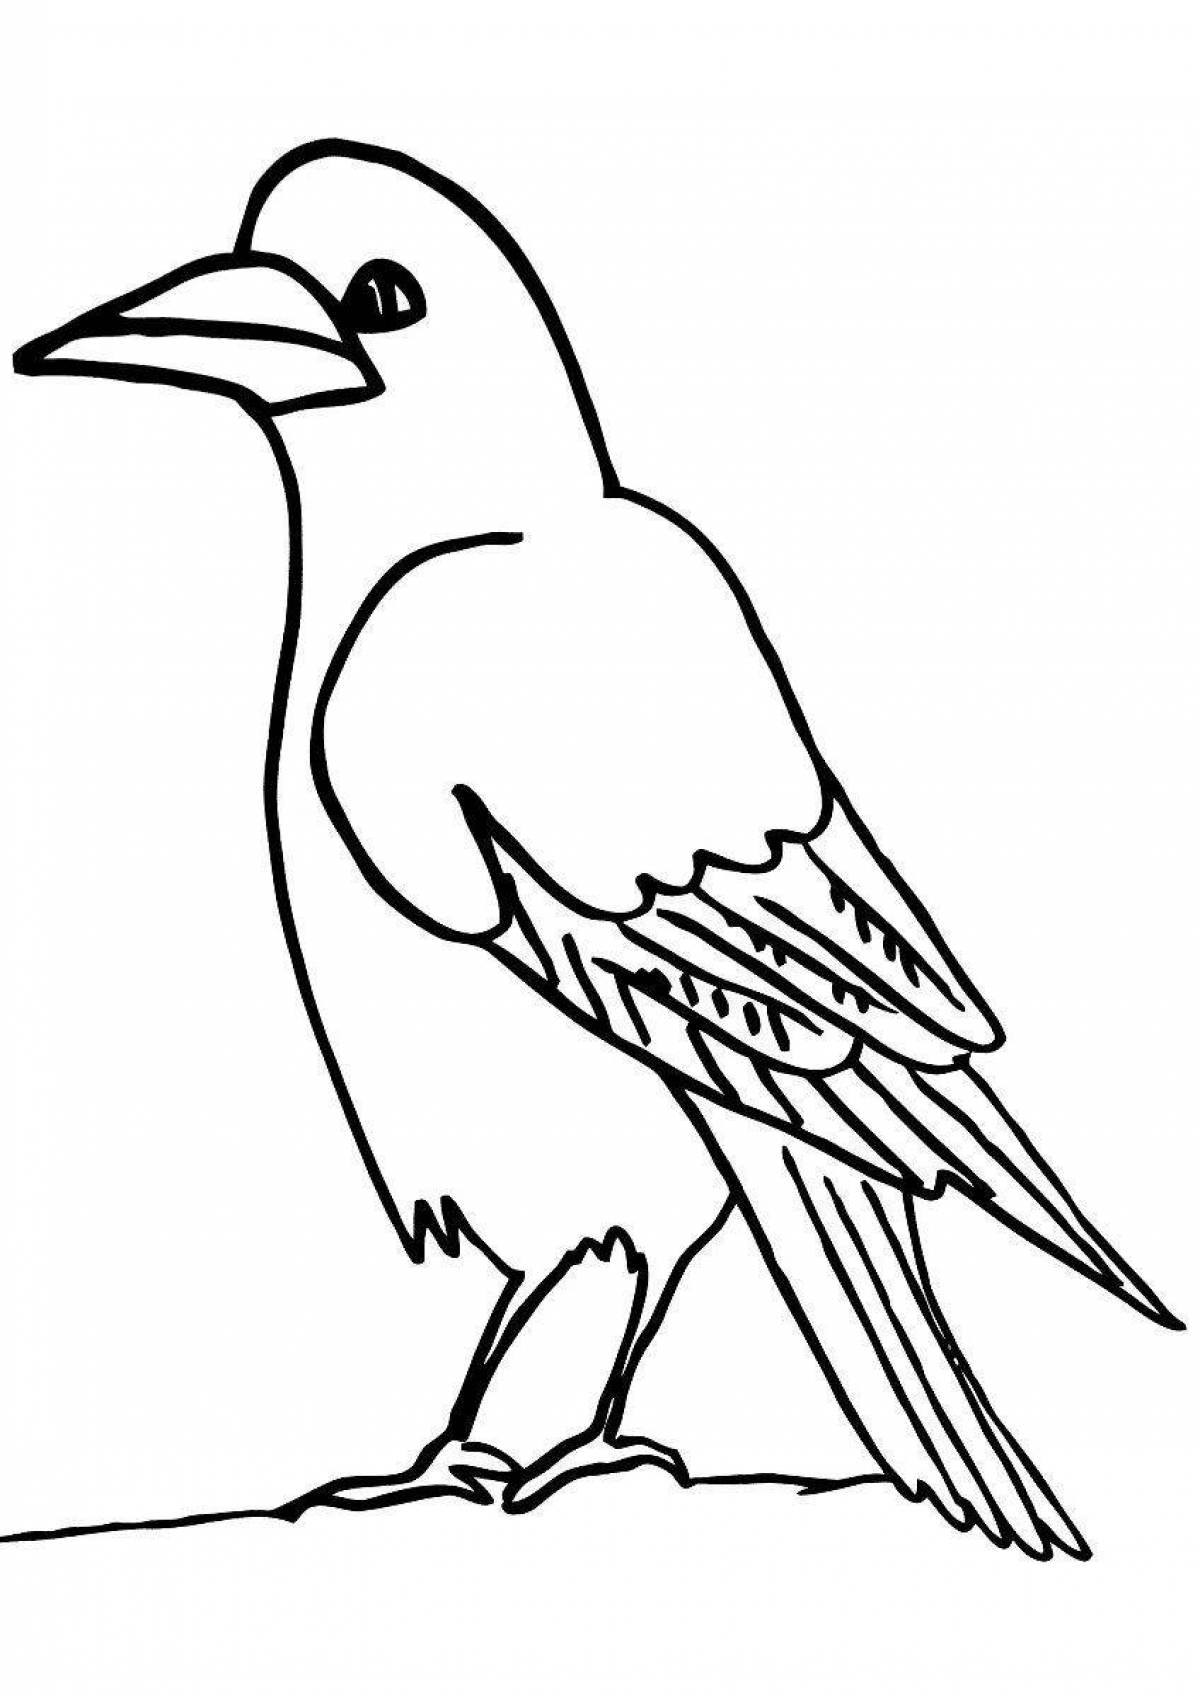 Amazing jackdaw coloring page